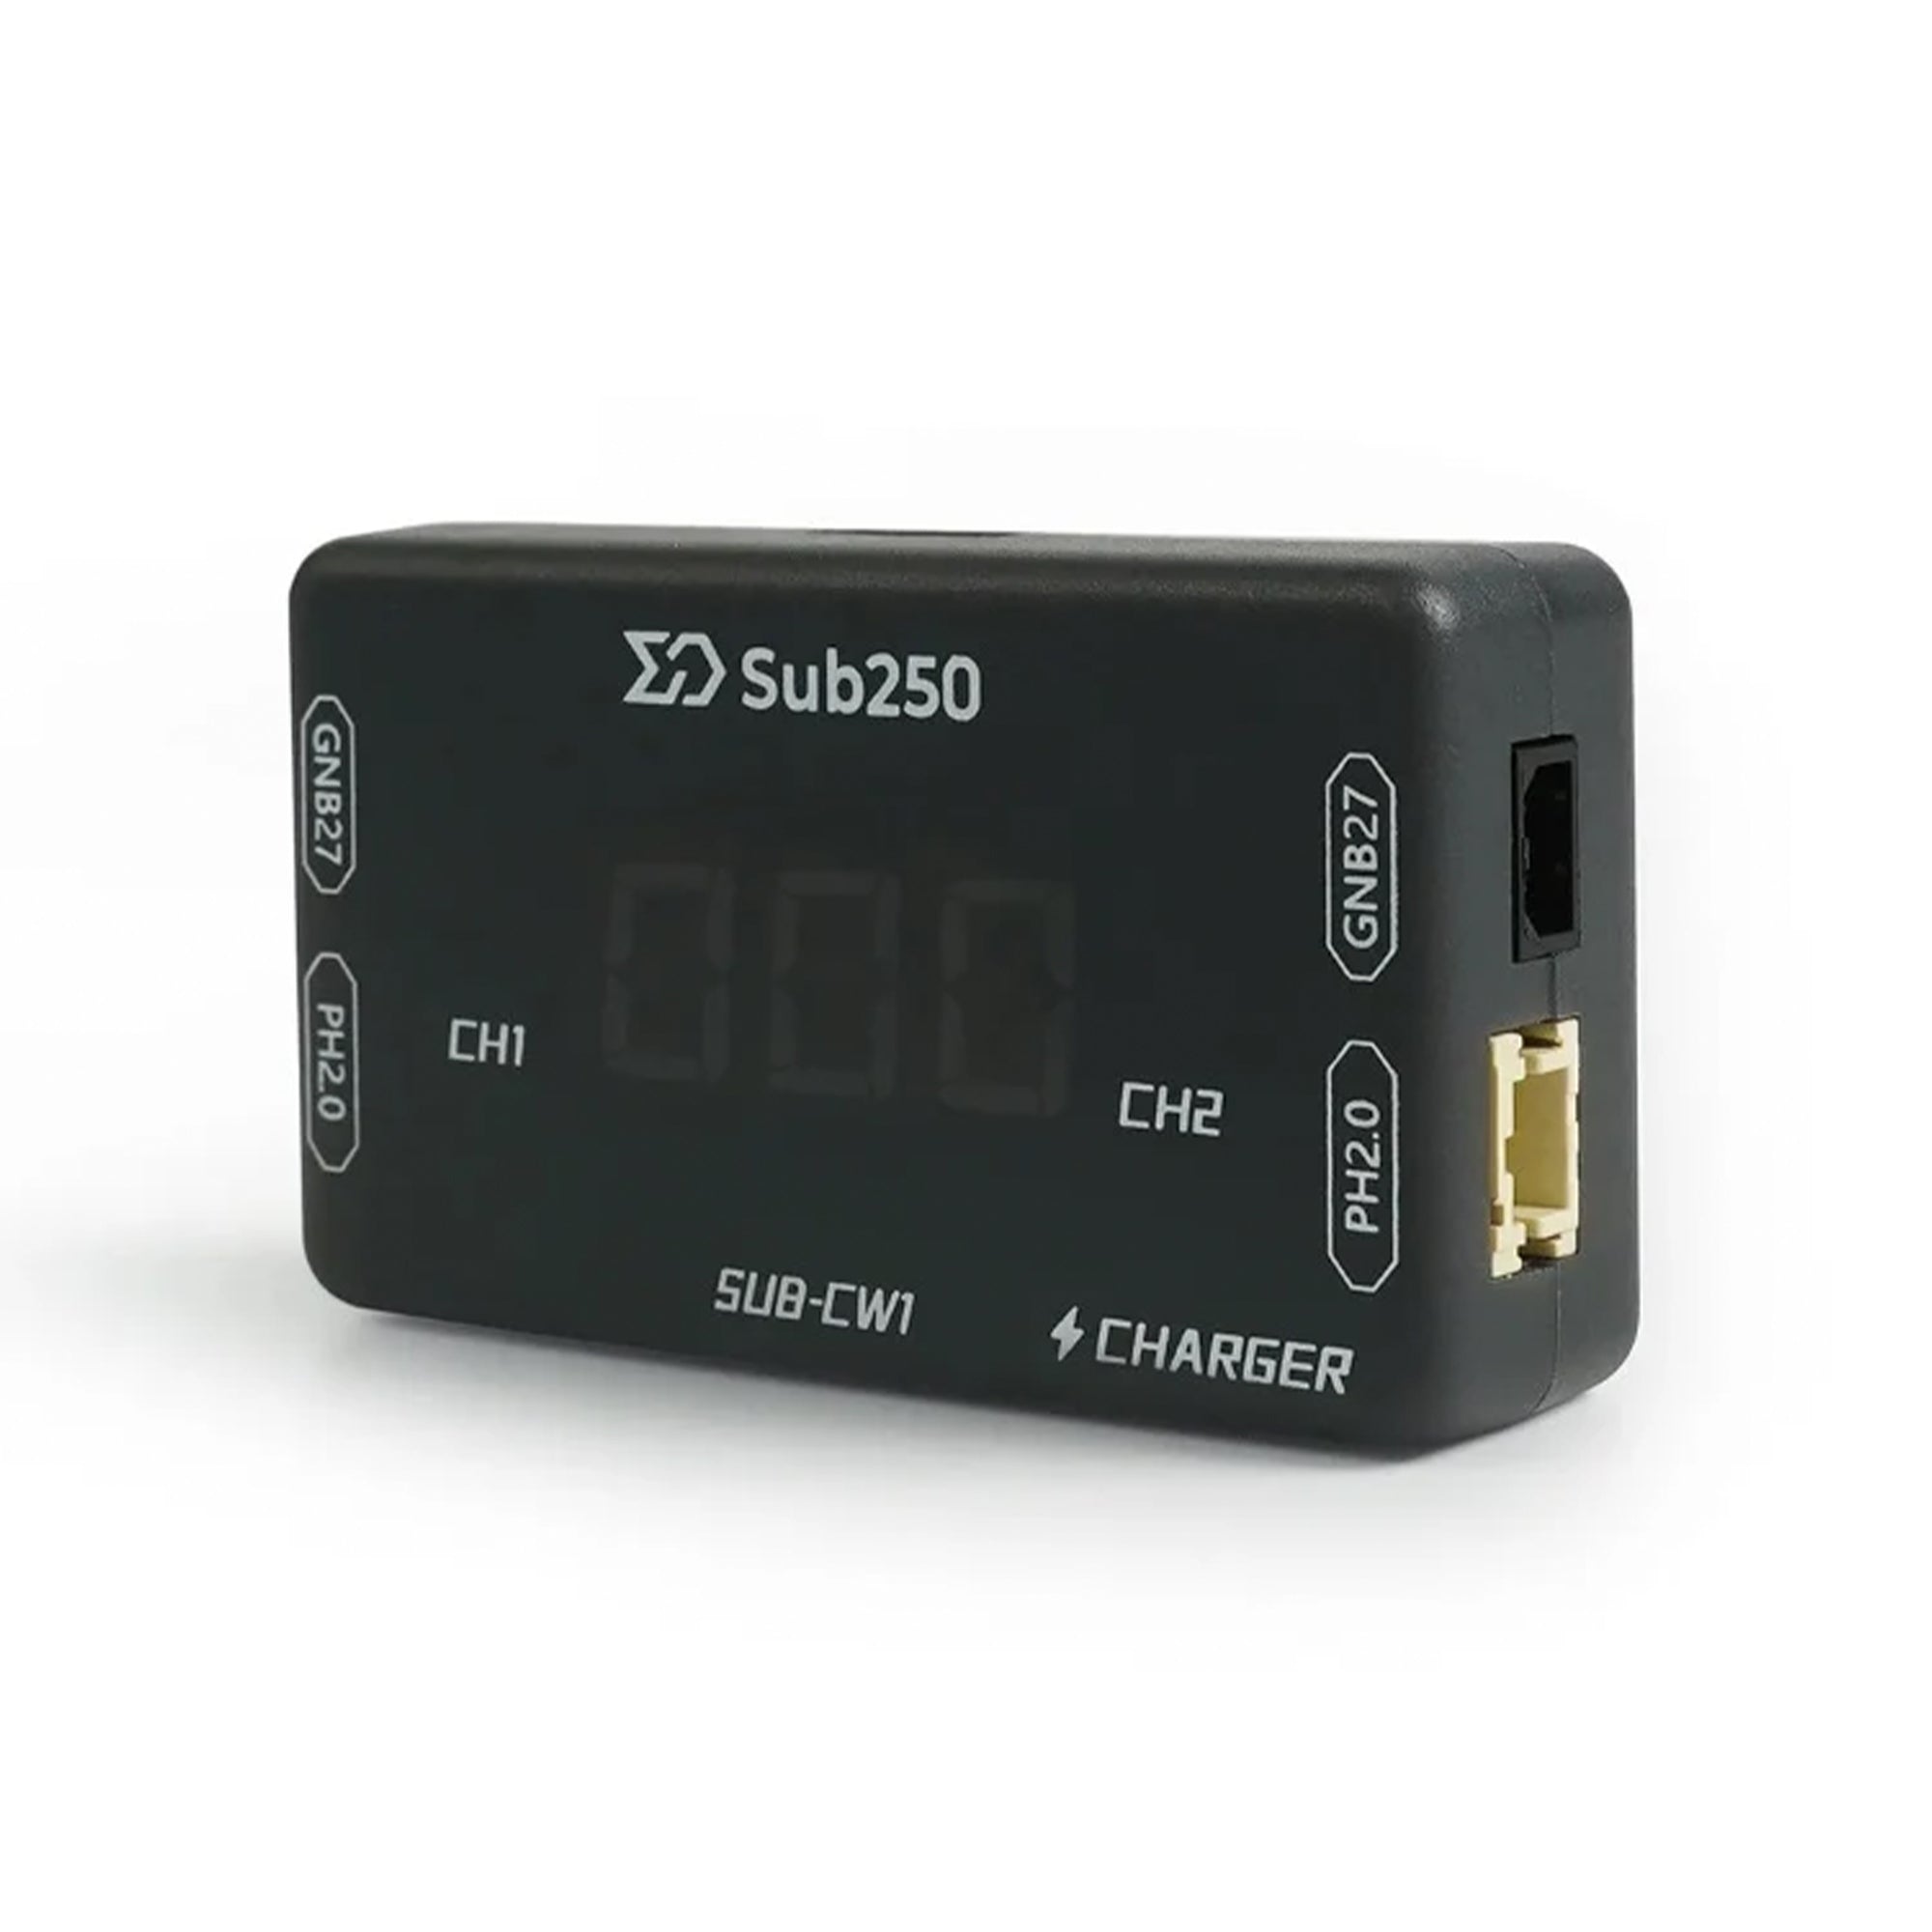 Sub250 CW1 Charger Support for GNB27 and PH2.0